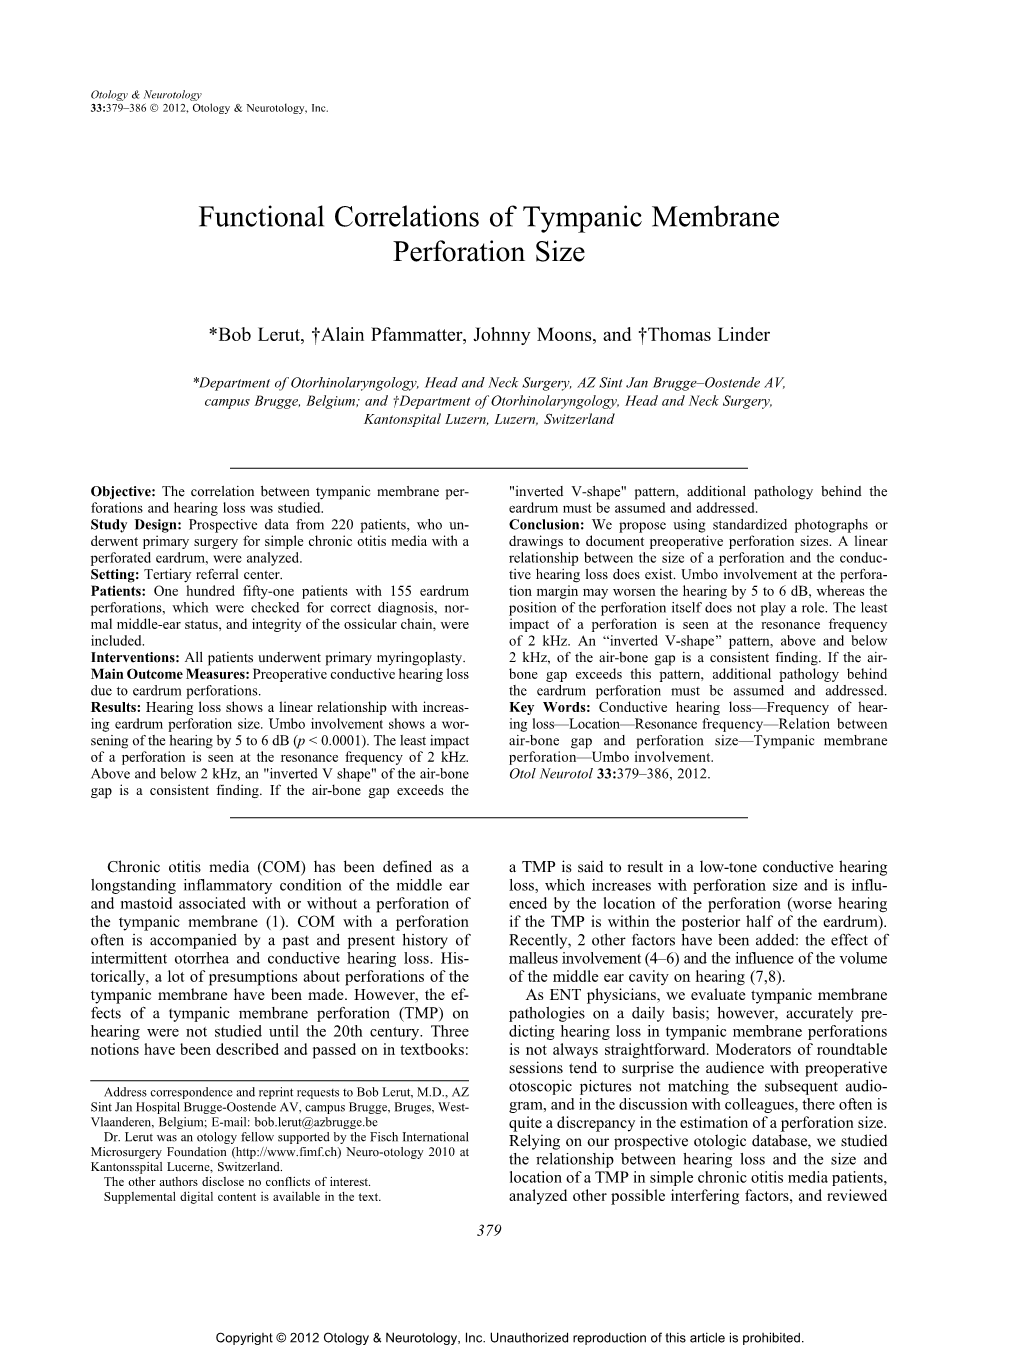 Functional Correlations of Tympanic Membrane Perforation Size